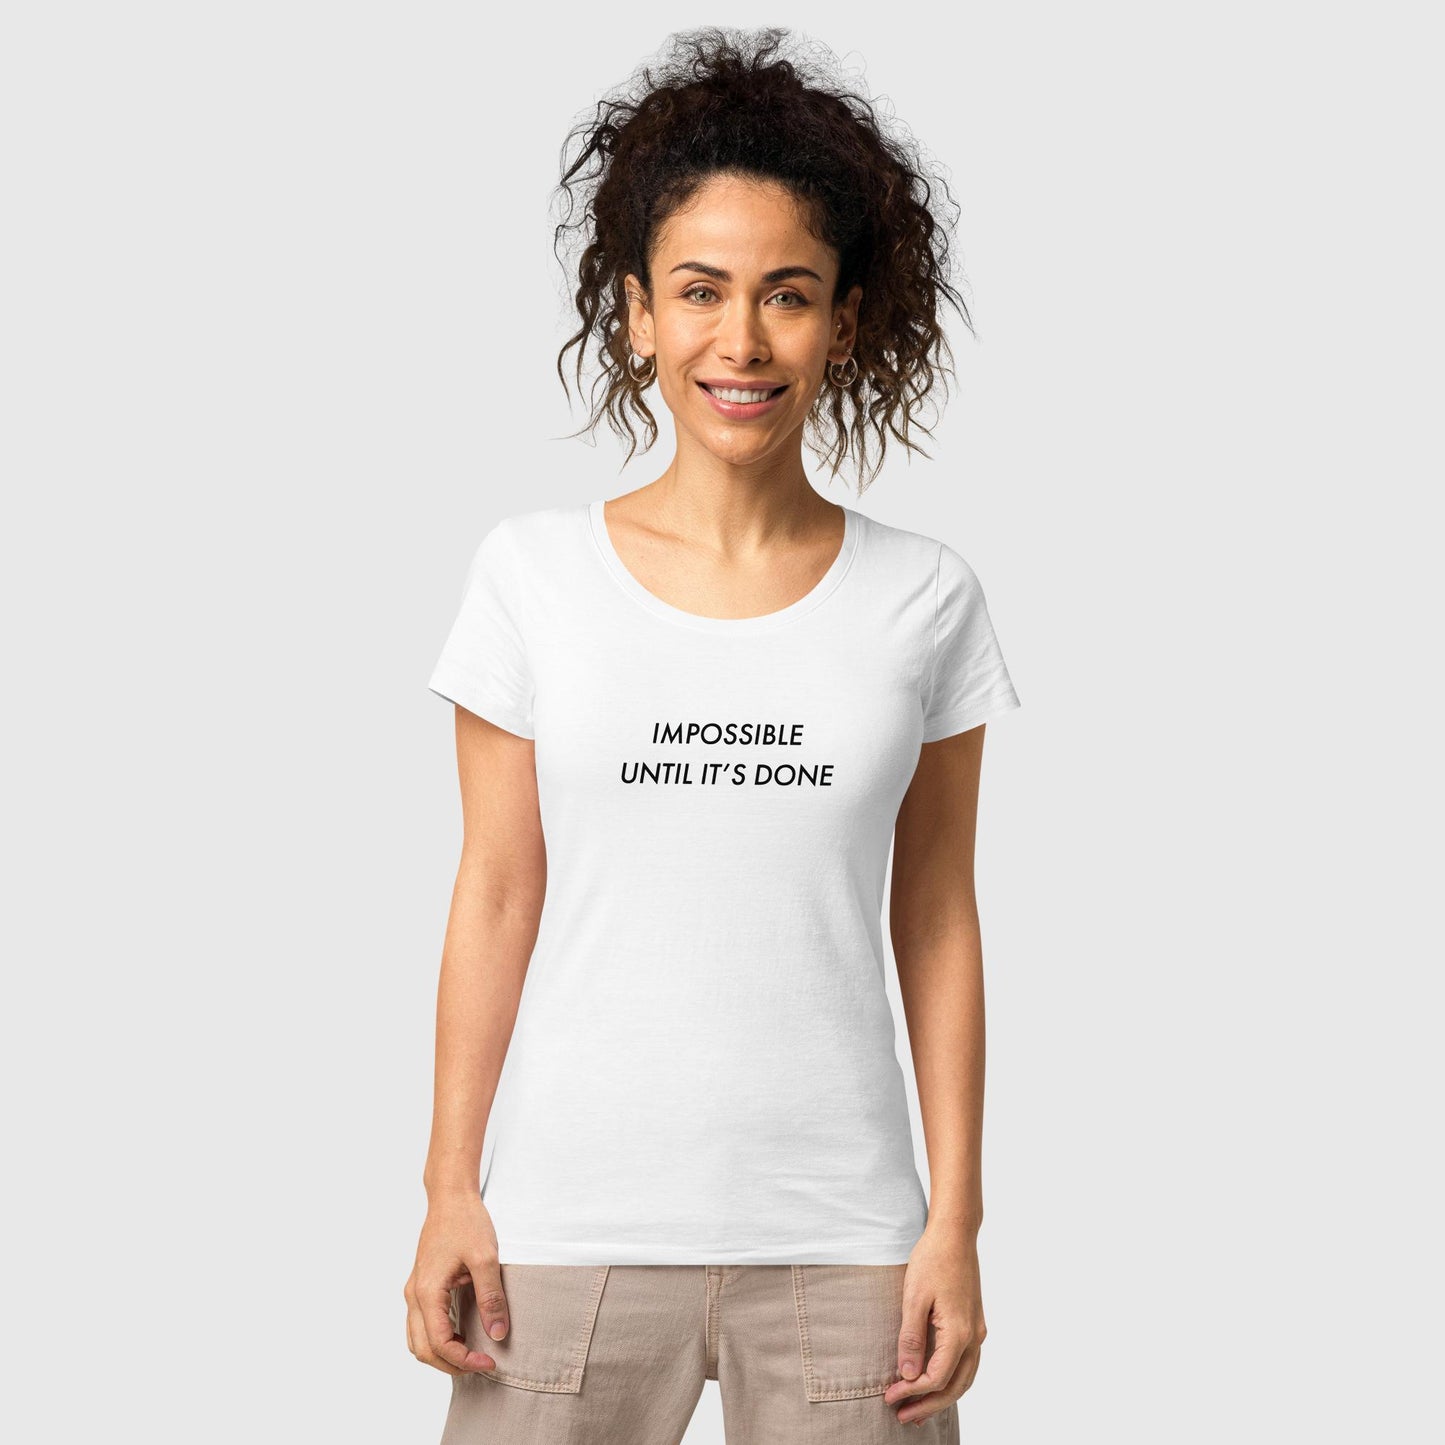 Women's white organic cotton t-shirt that features, "Impossible Until It's Done," inspired by Nelson Mandela's inspirational quote, "It always seems impossible until it's done."